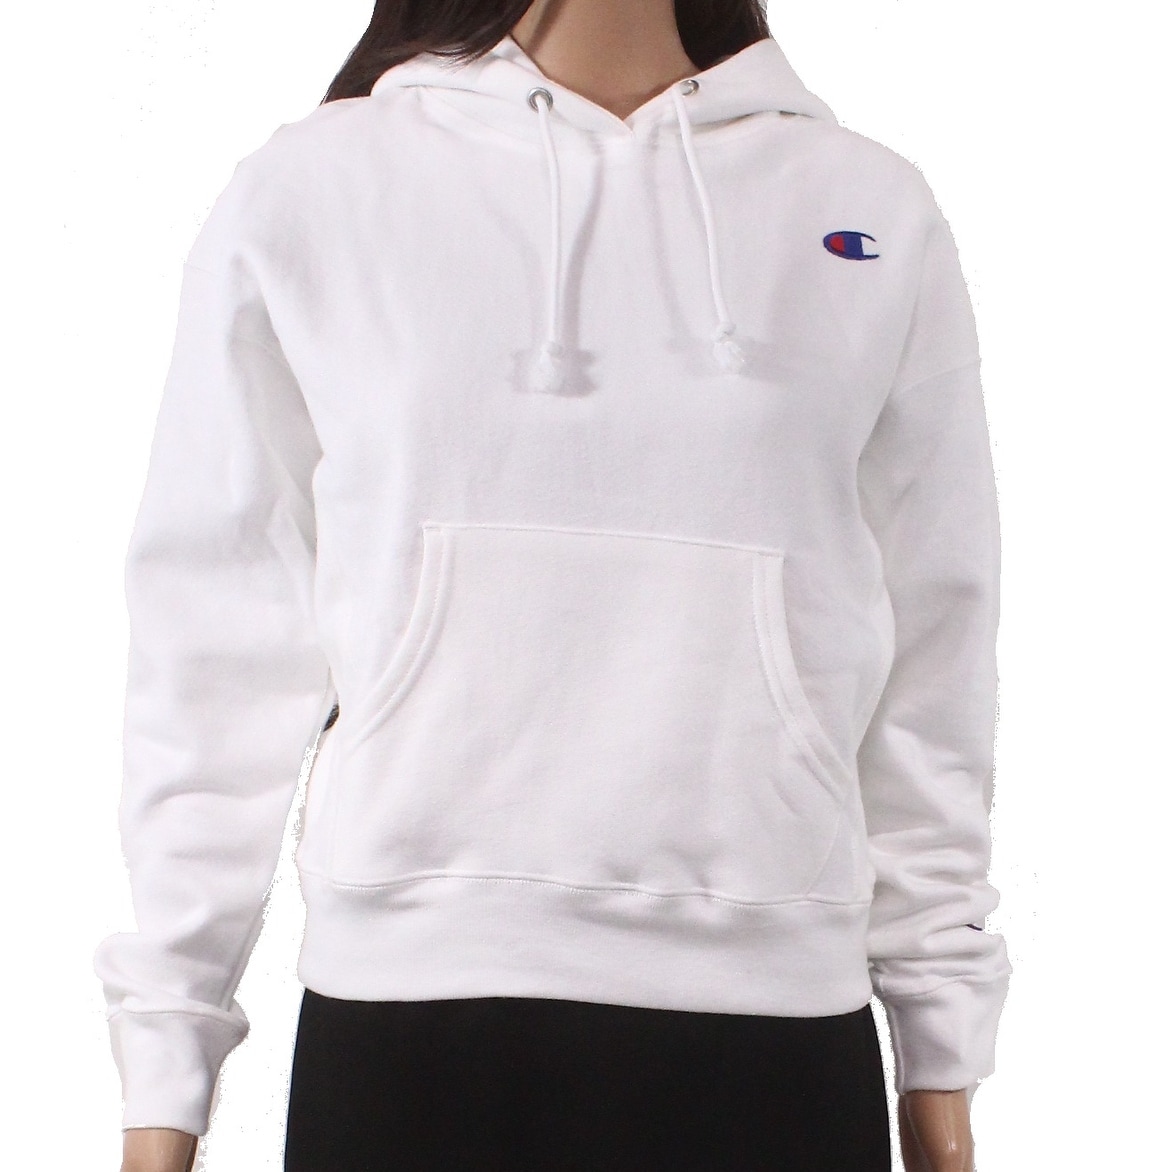 Womens Hoodie White Size Large L 